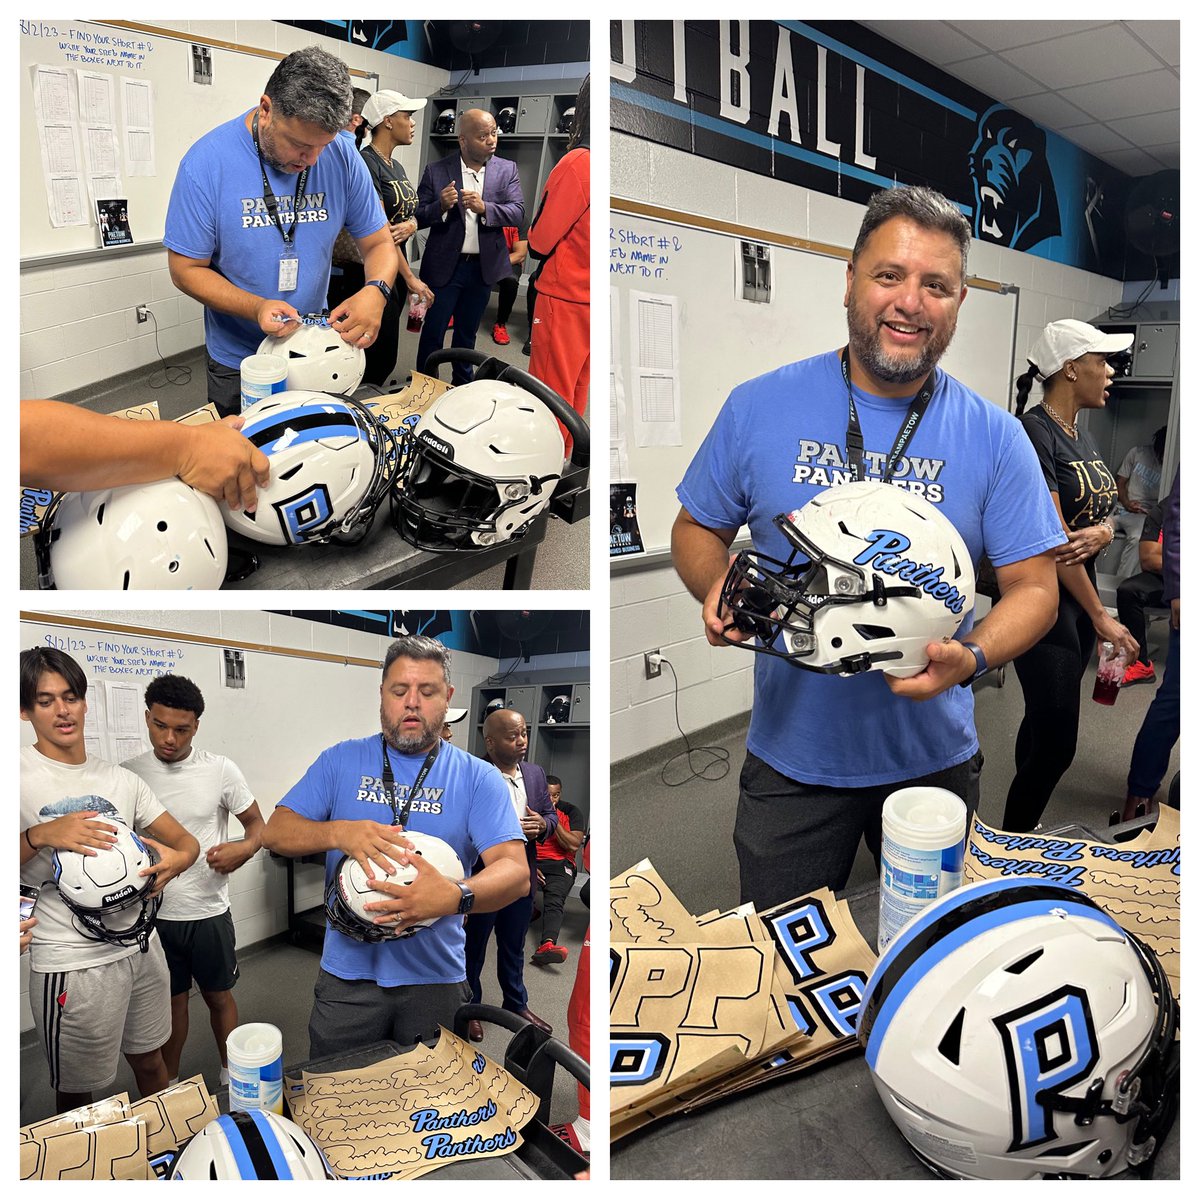 Taking care of a player who couldn’t make @PaetowFootball Decals with Dads this morning. #Community #PantherProud @PaetowHS